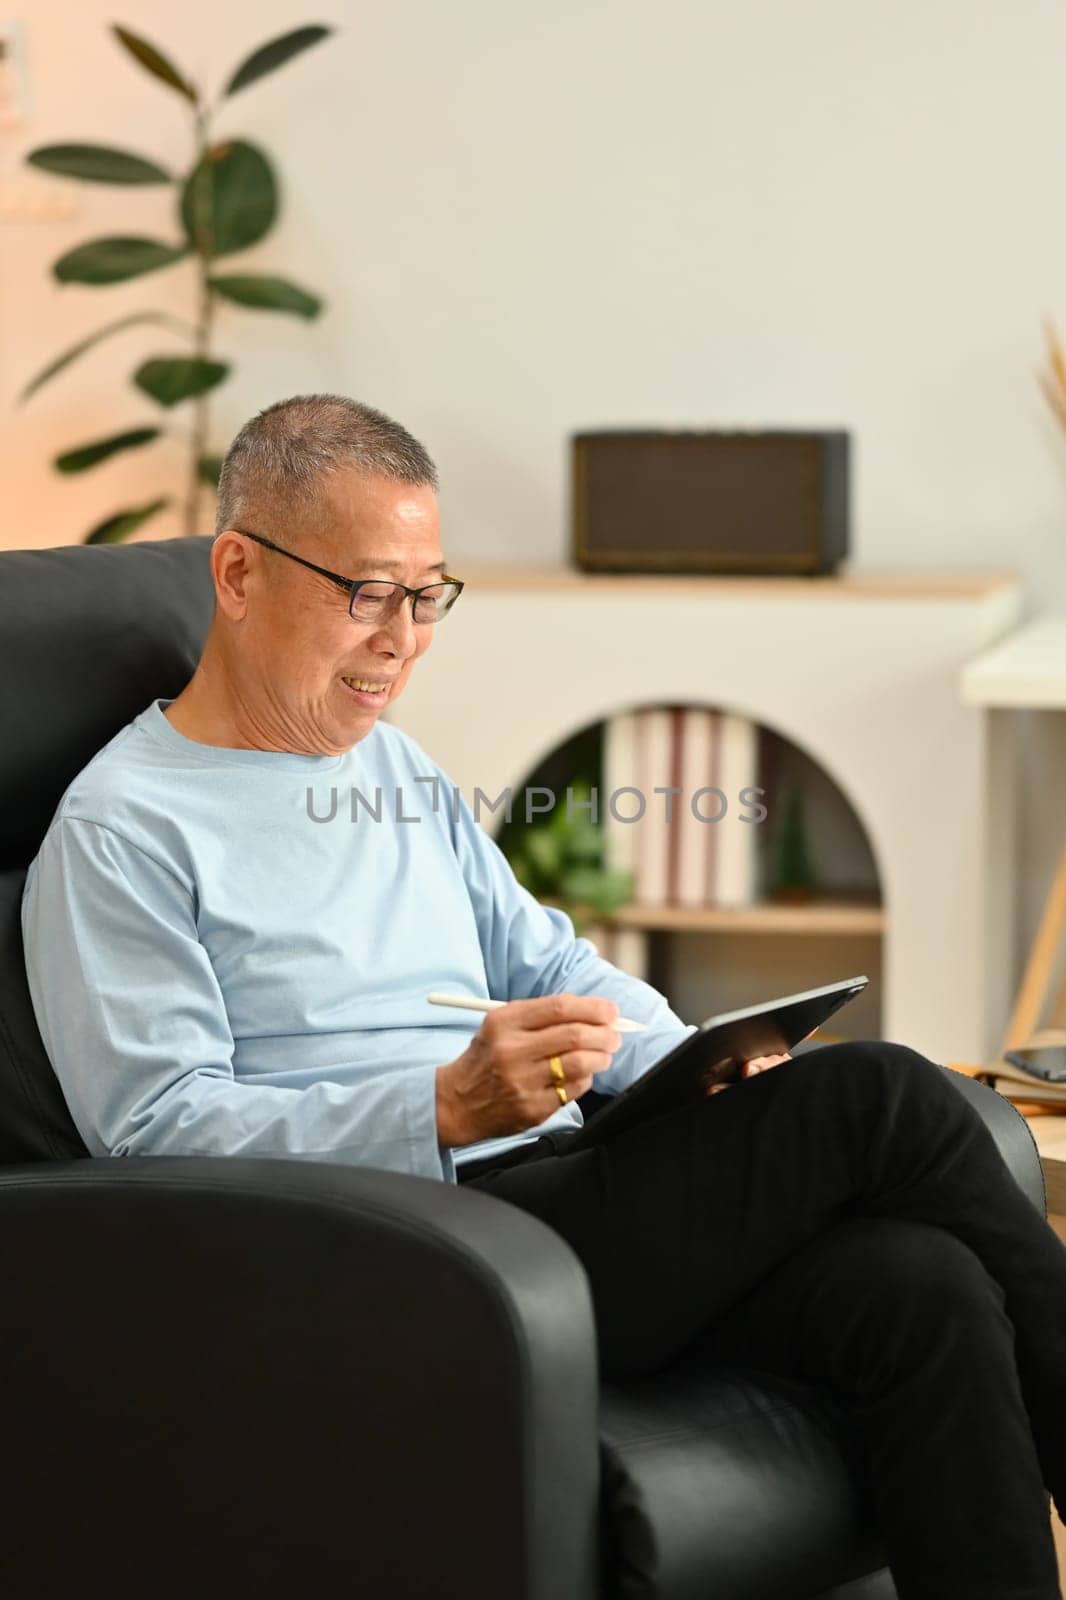 Smiling senior man in glasses using digital tablet while sitting on armchair at home.